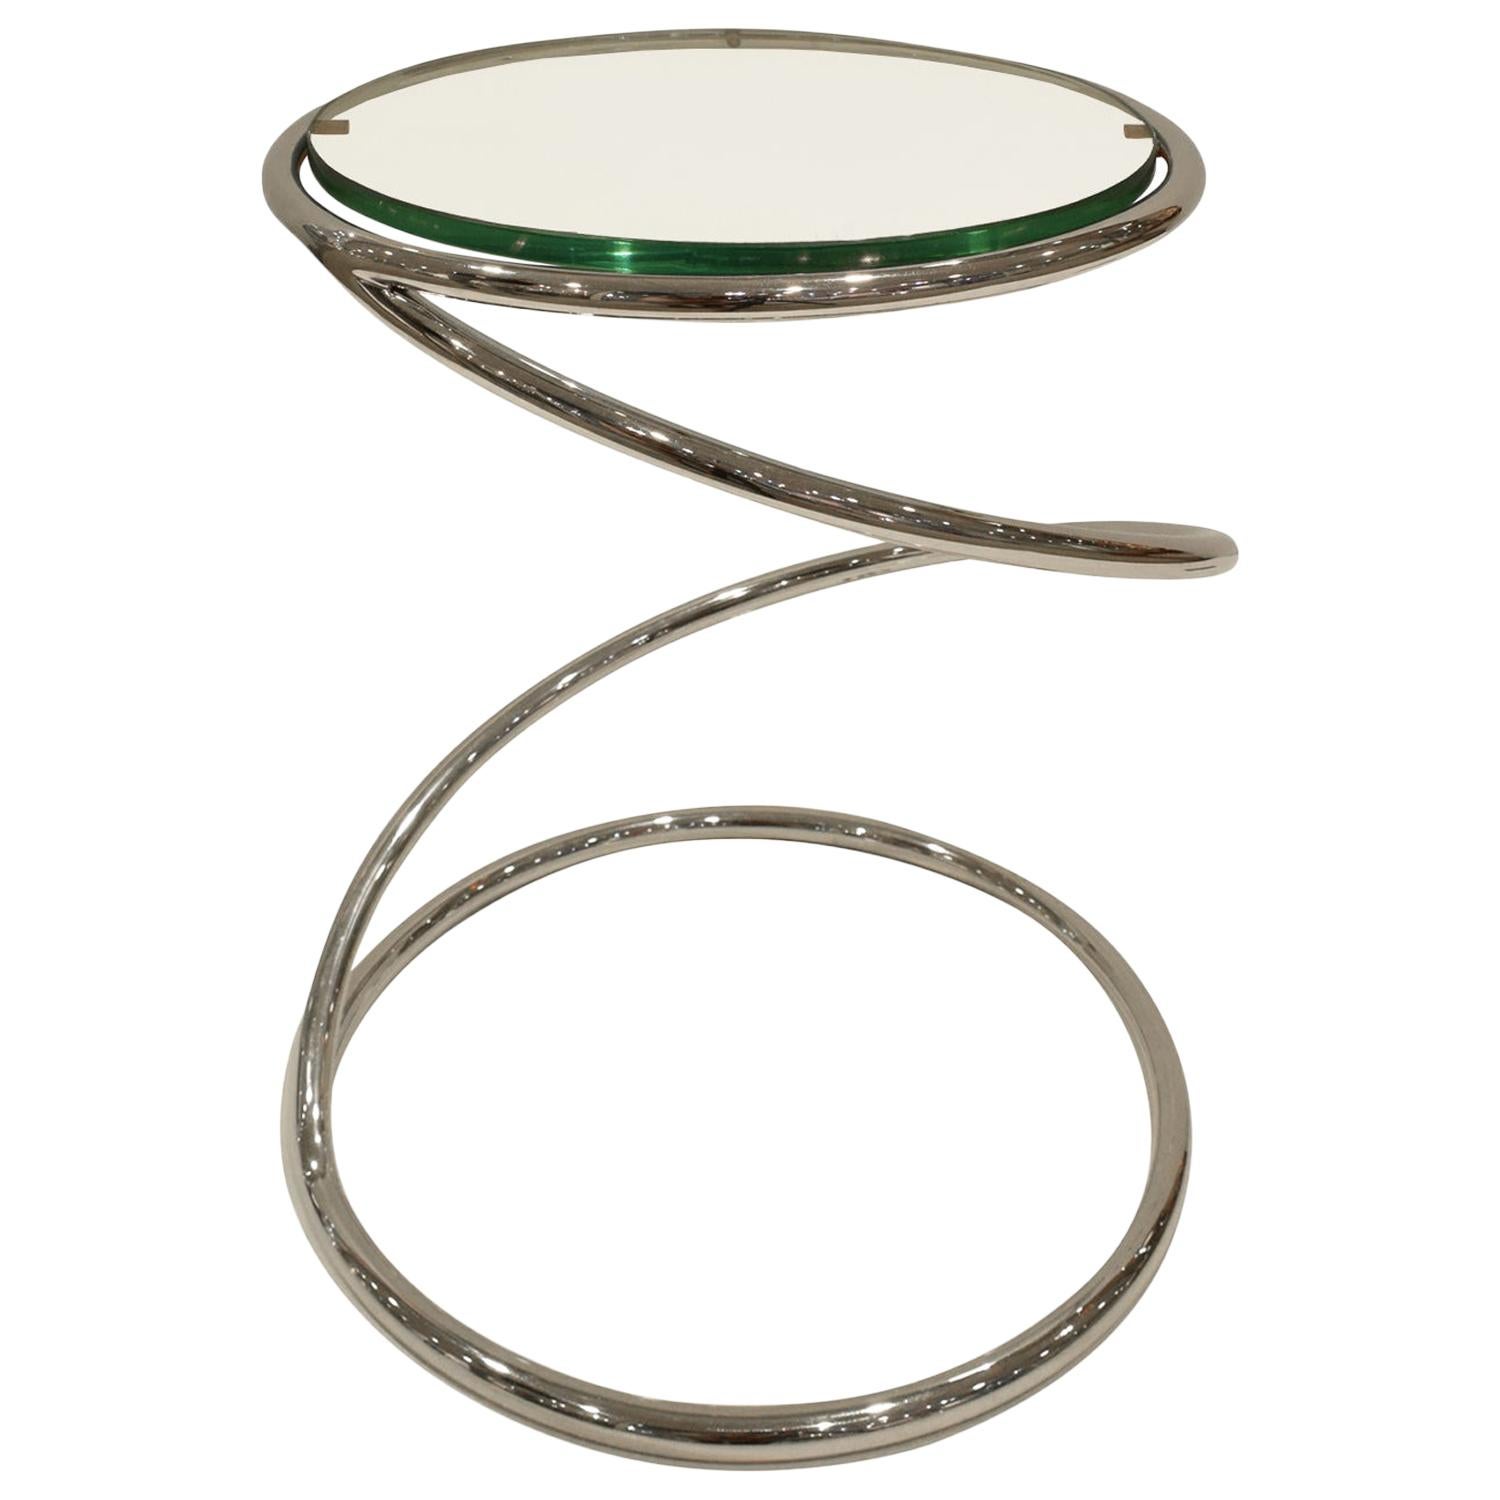 Pace Collection "Swirl Table" in Chrome and Glass, 1970s